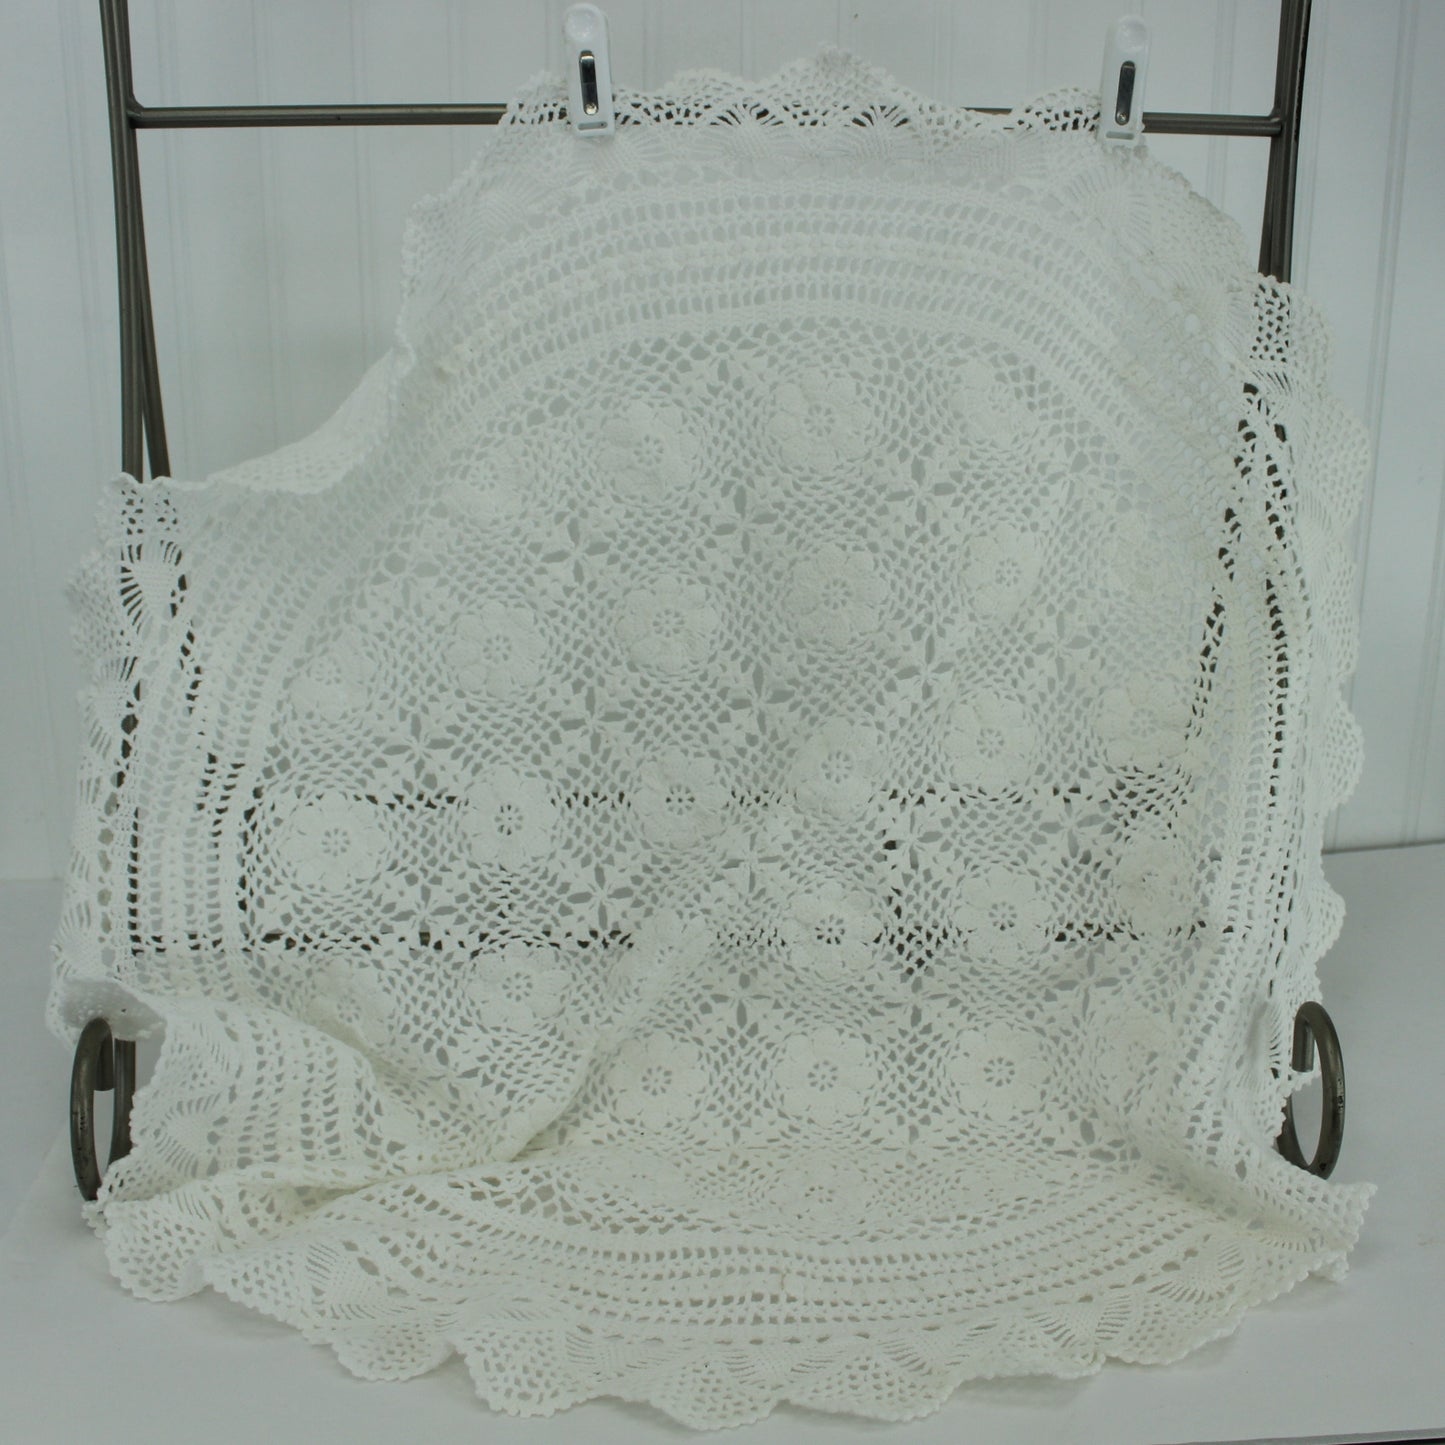 Large Round Crochet Doily Tablecloth White Heavy Cotton 30" Diameter heavy substantial weight